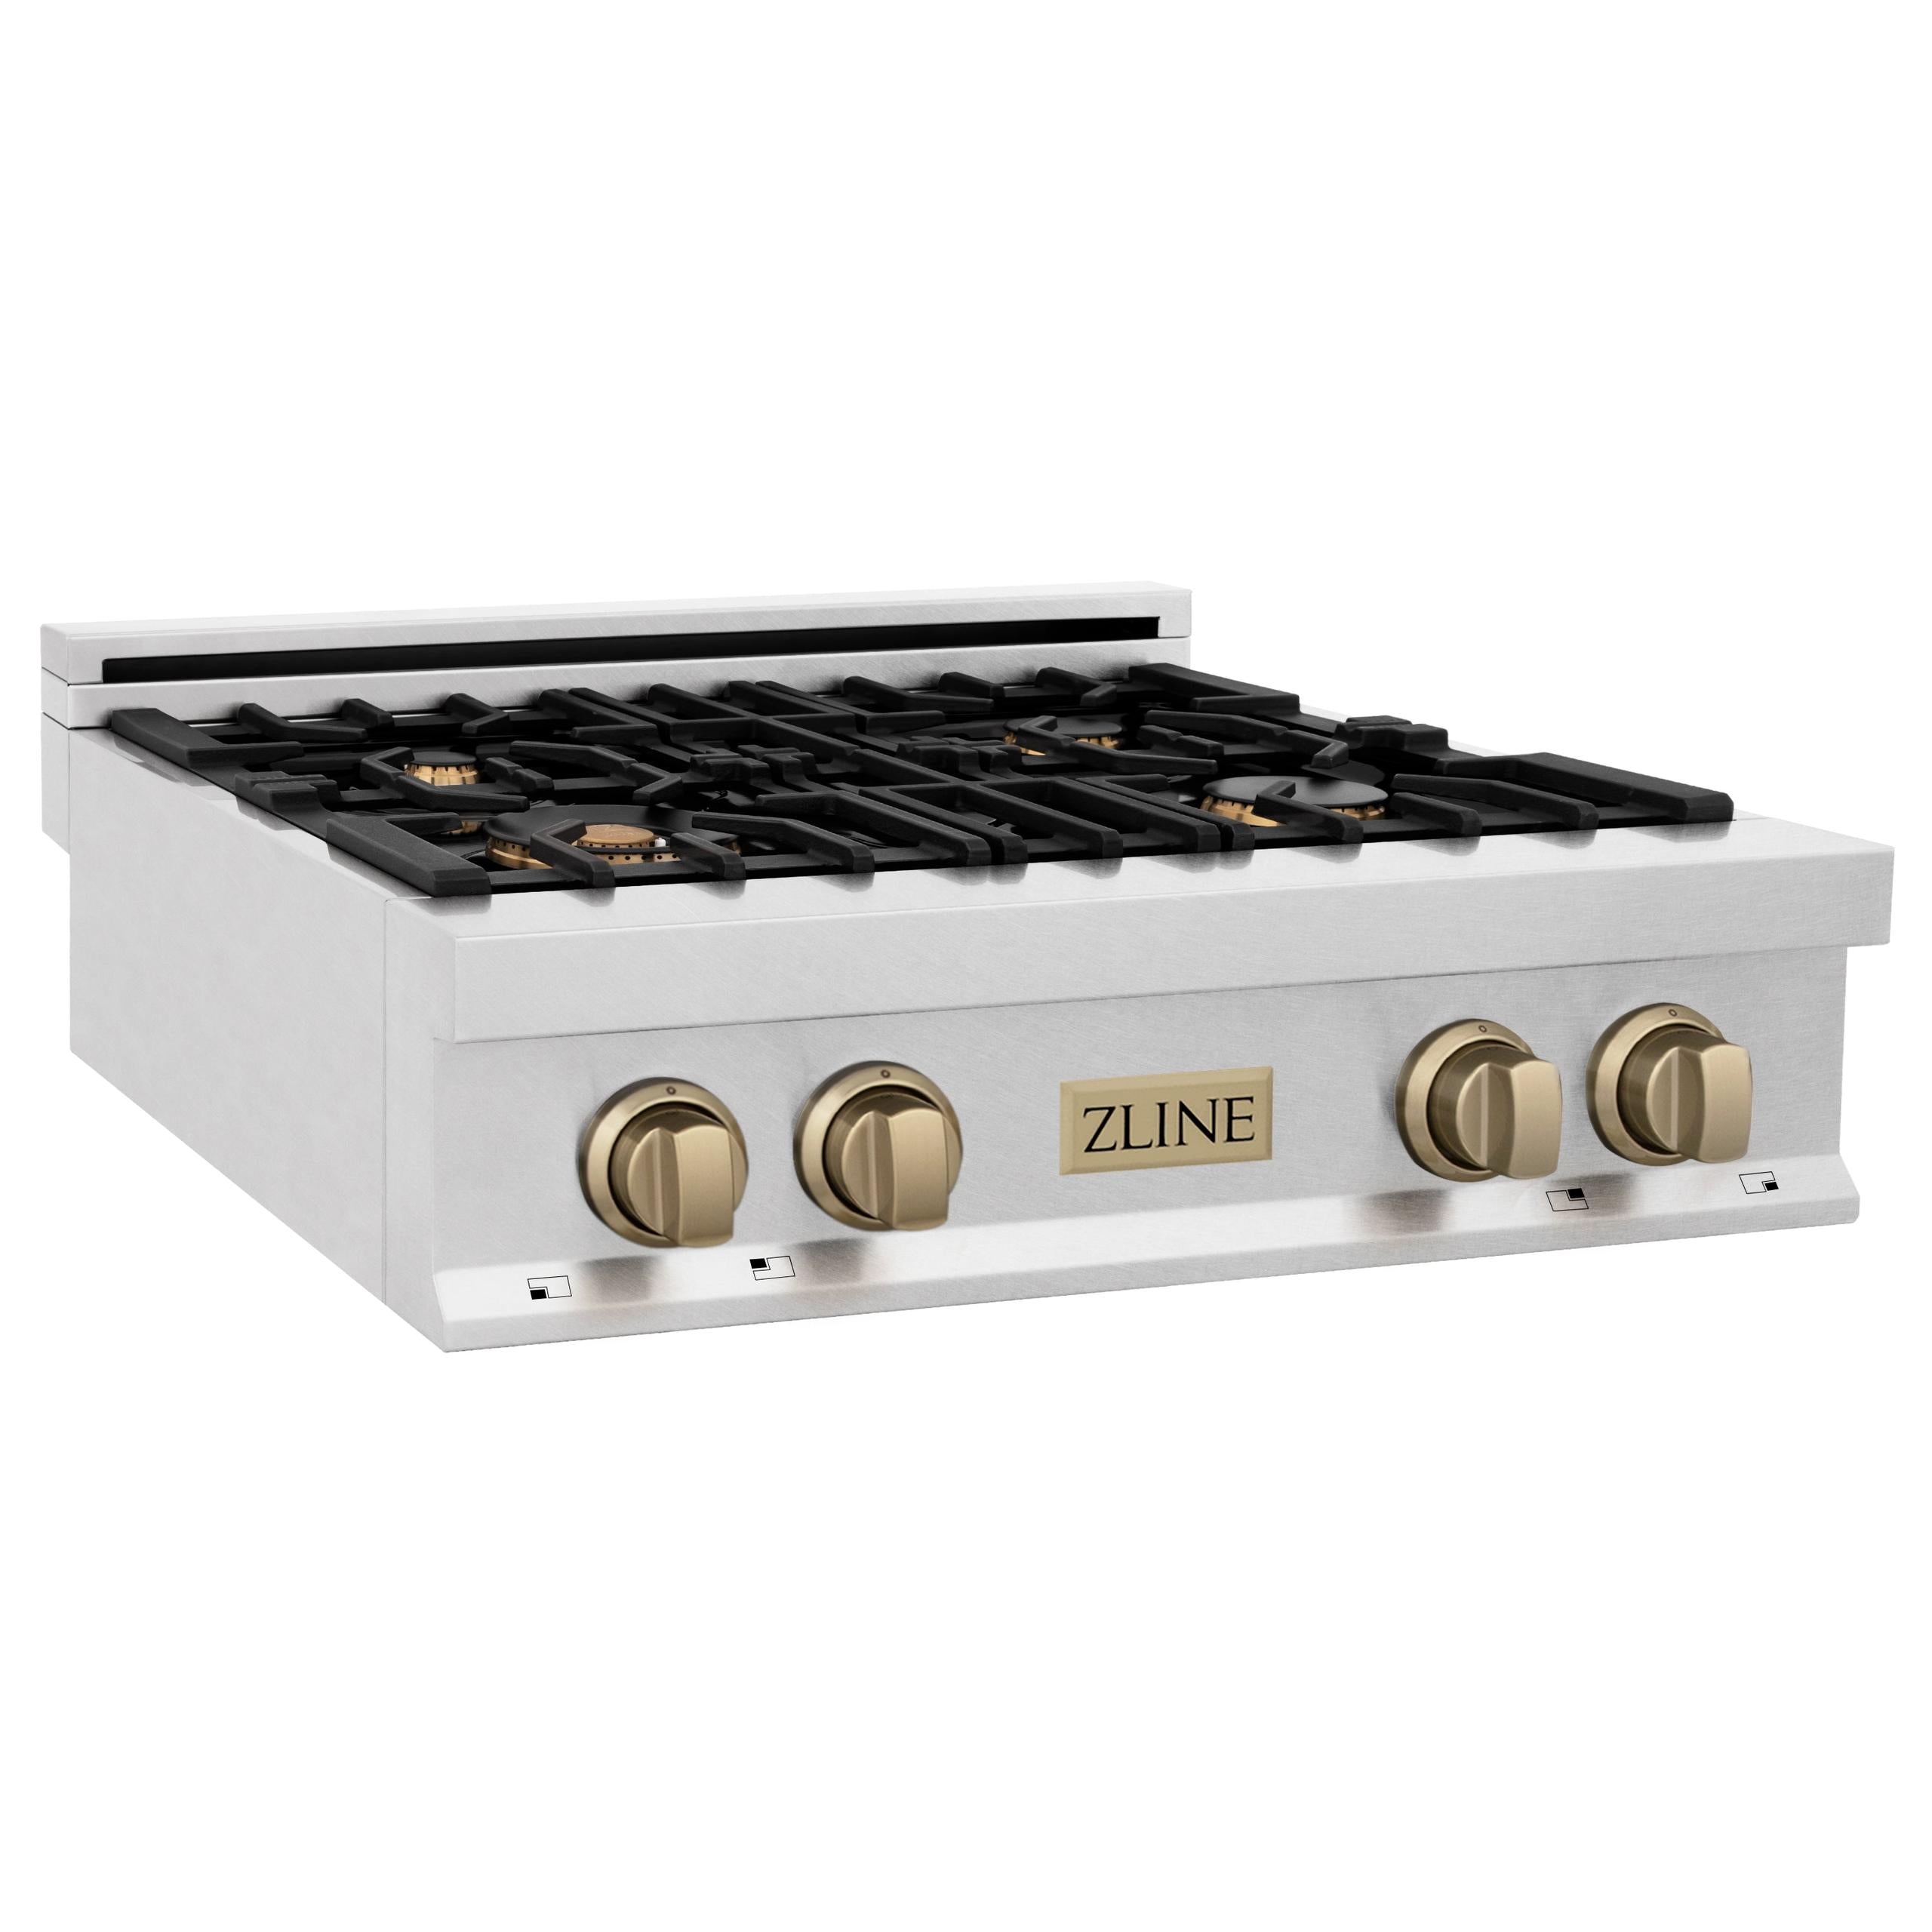 ZLINE KITCHEN AND BATH RTSZ30CB ZLINE Autograph Edition 30" Porcelain Rangetop with 4 Gas Burners in DuraSnow R Stainless Steel and Accents Color: Champagne Bronze